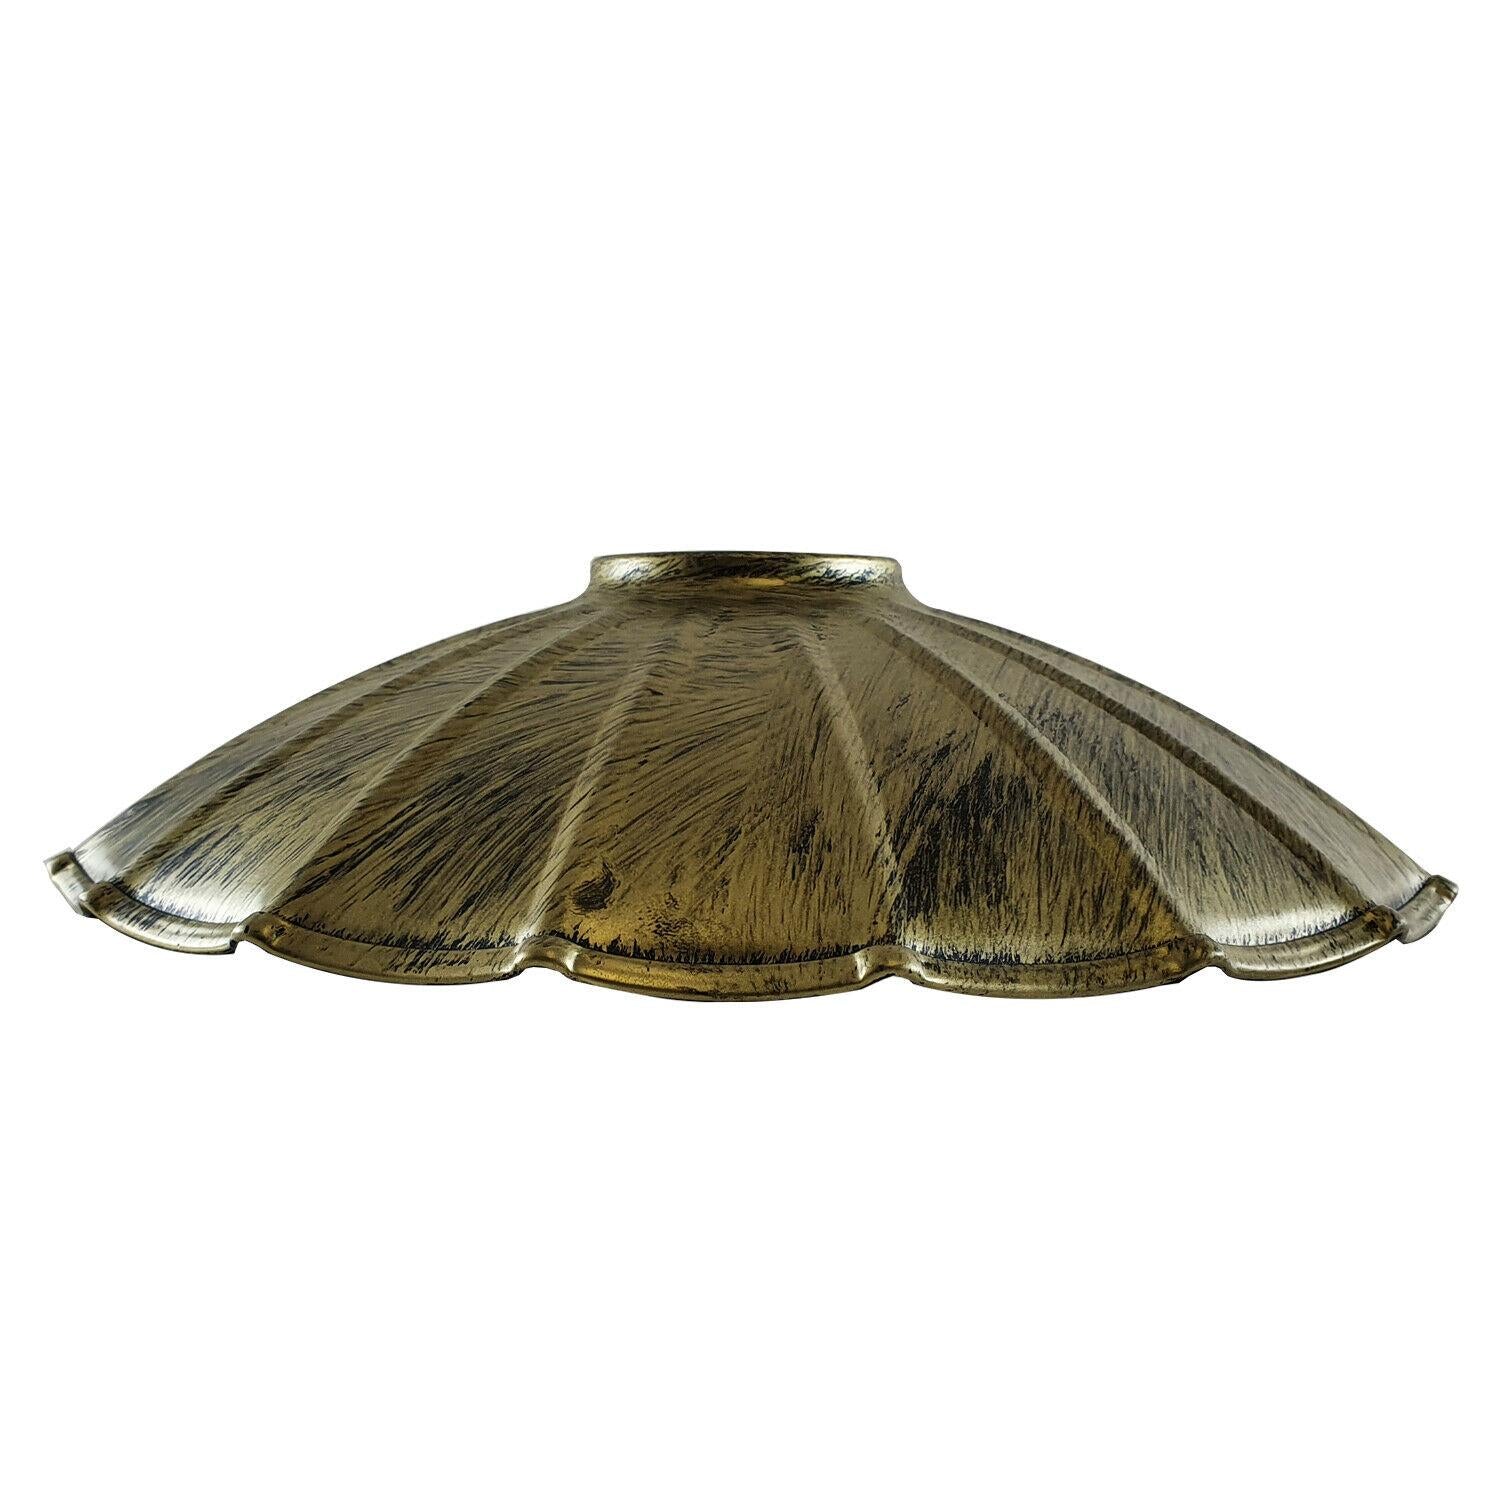 Vintage Industrial Ceiling Pendant Light Rustic Lampshade Easy Fit Wavy Shade UK